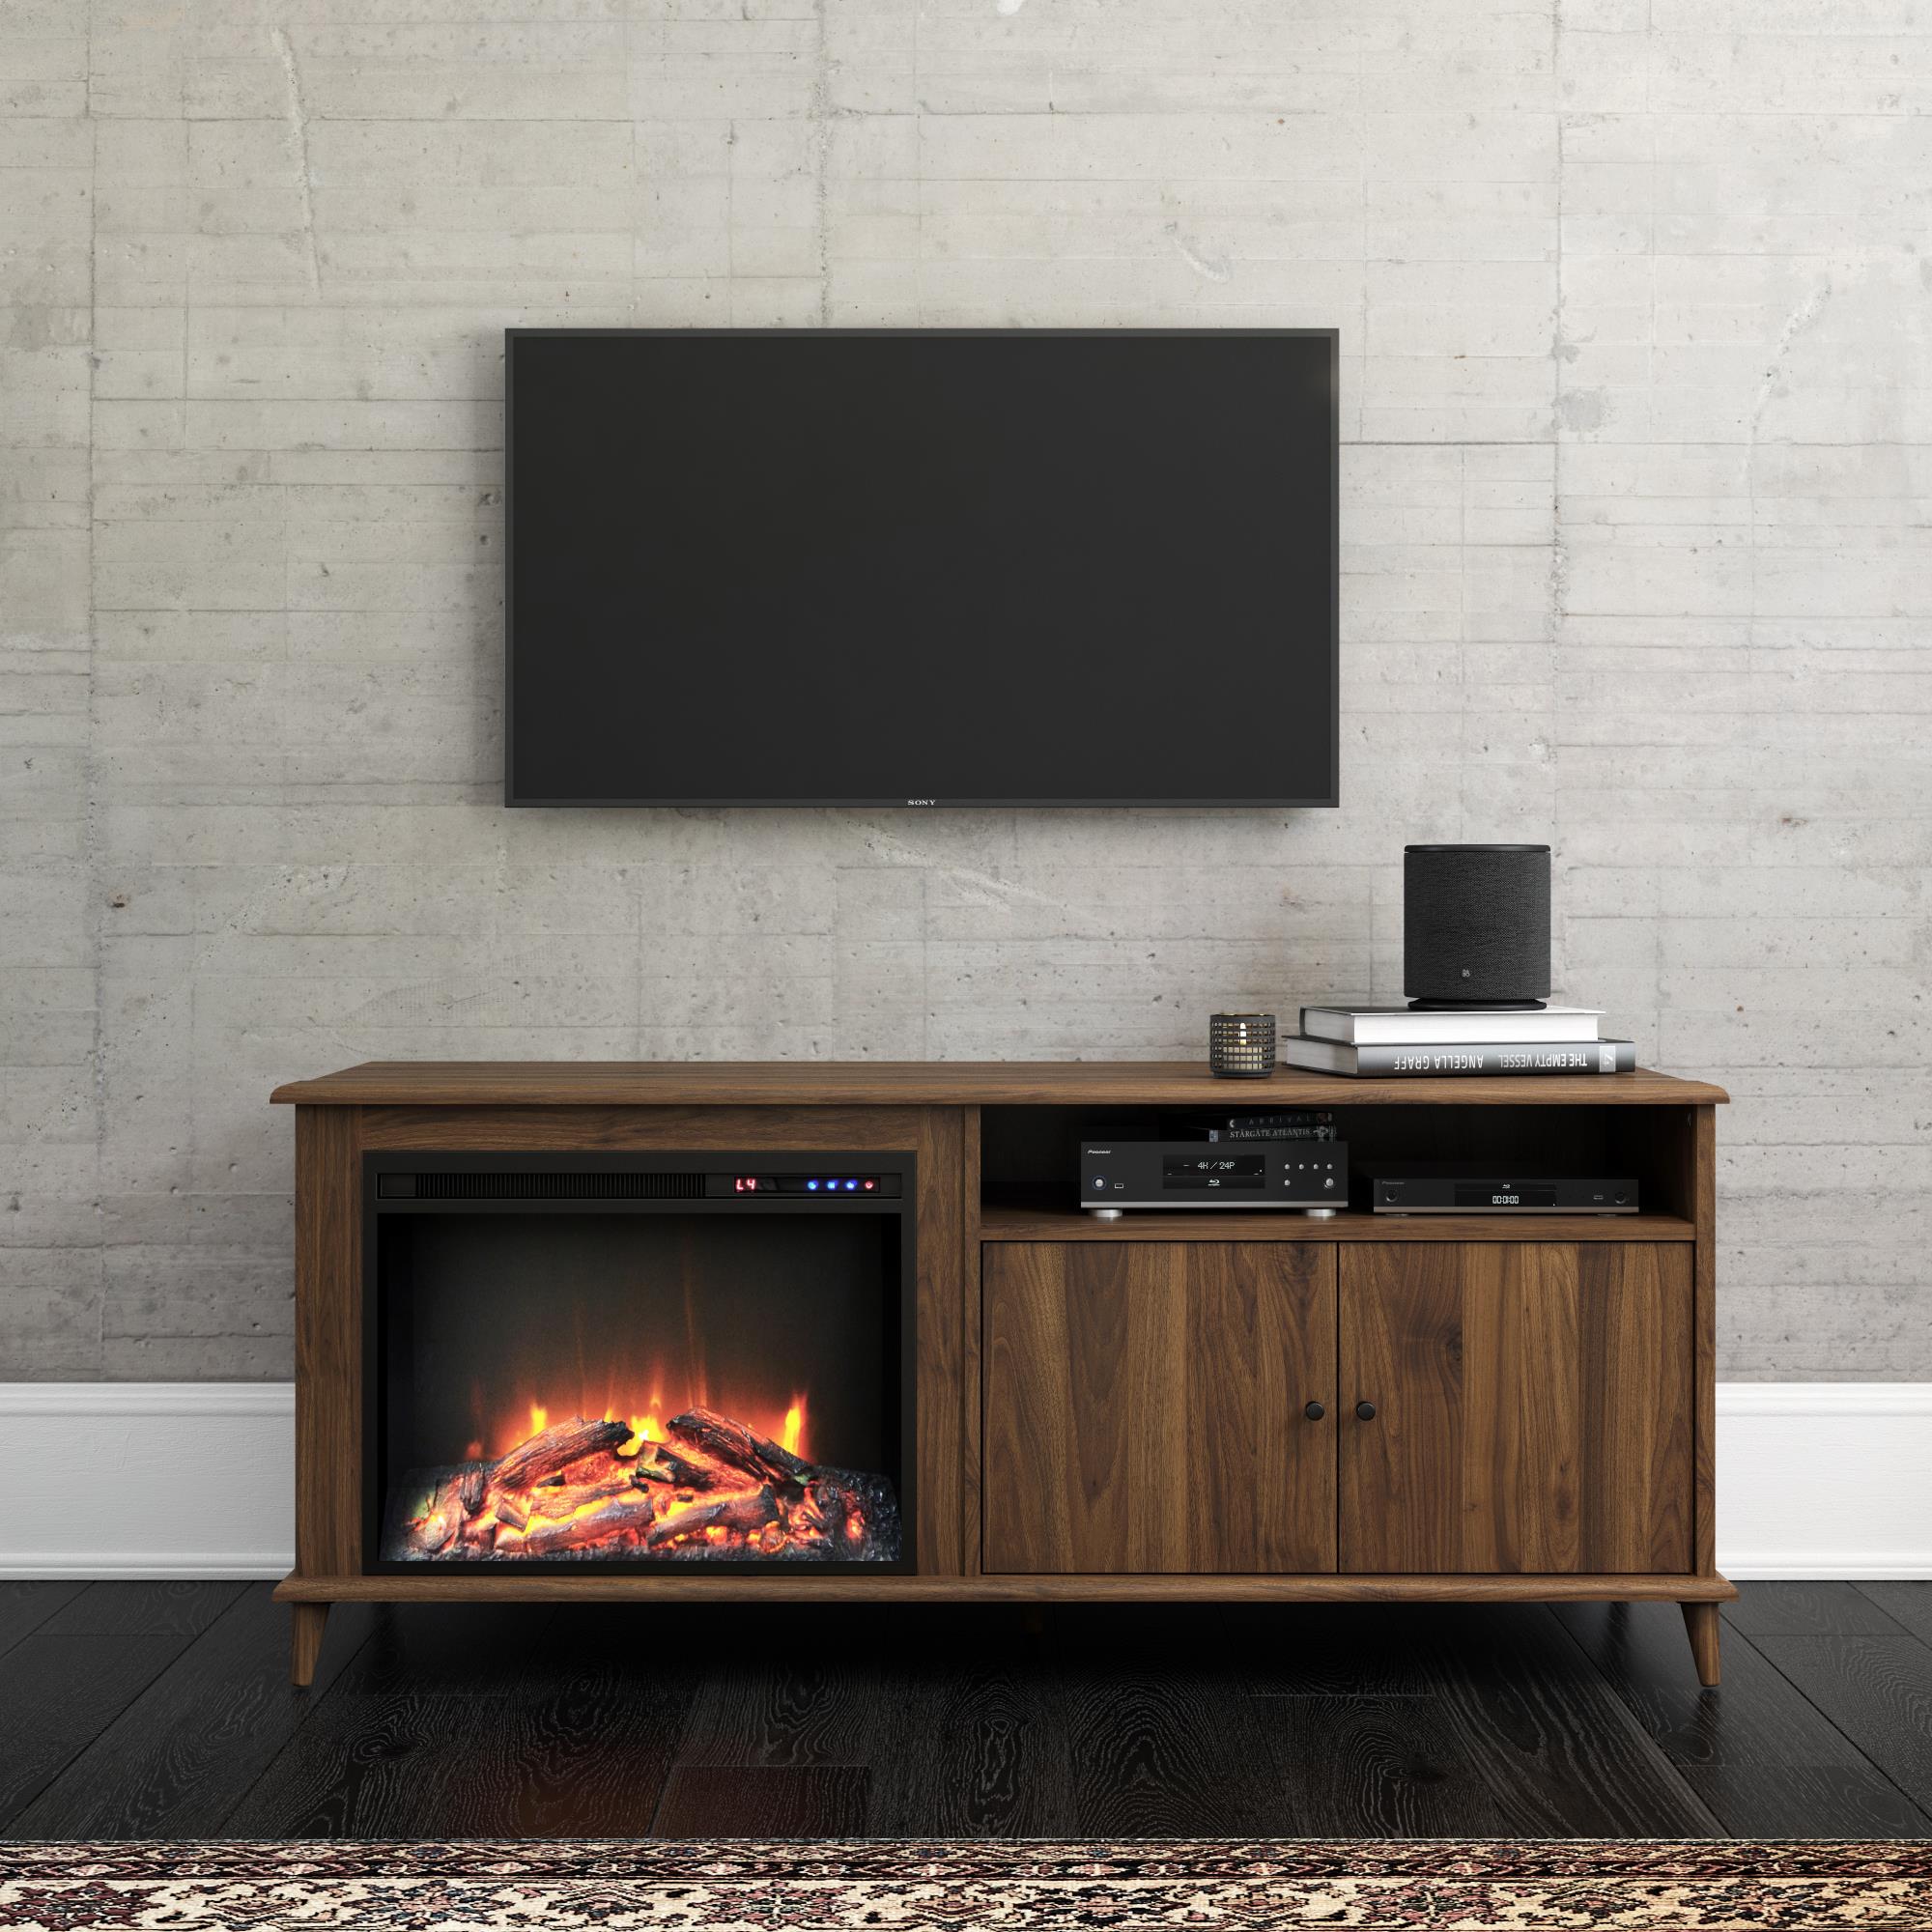 Ameriwood Home Farnsworth Fireplace TV Stand for TVs up to 65", Walnut - image 2 of 11